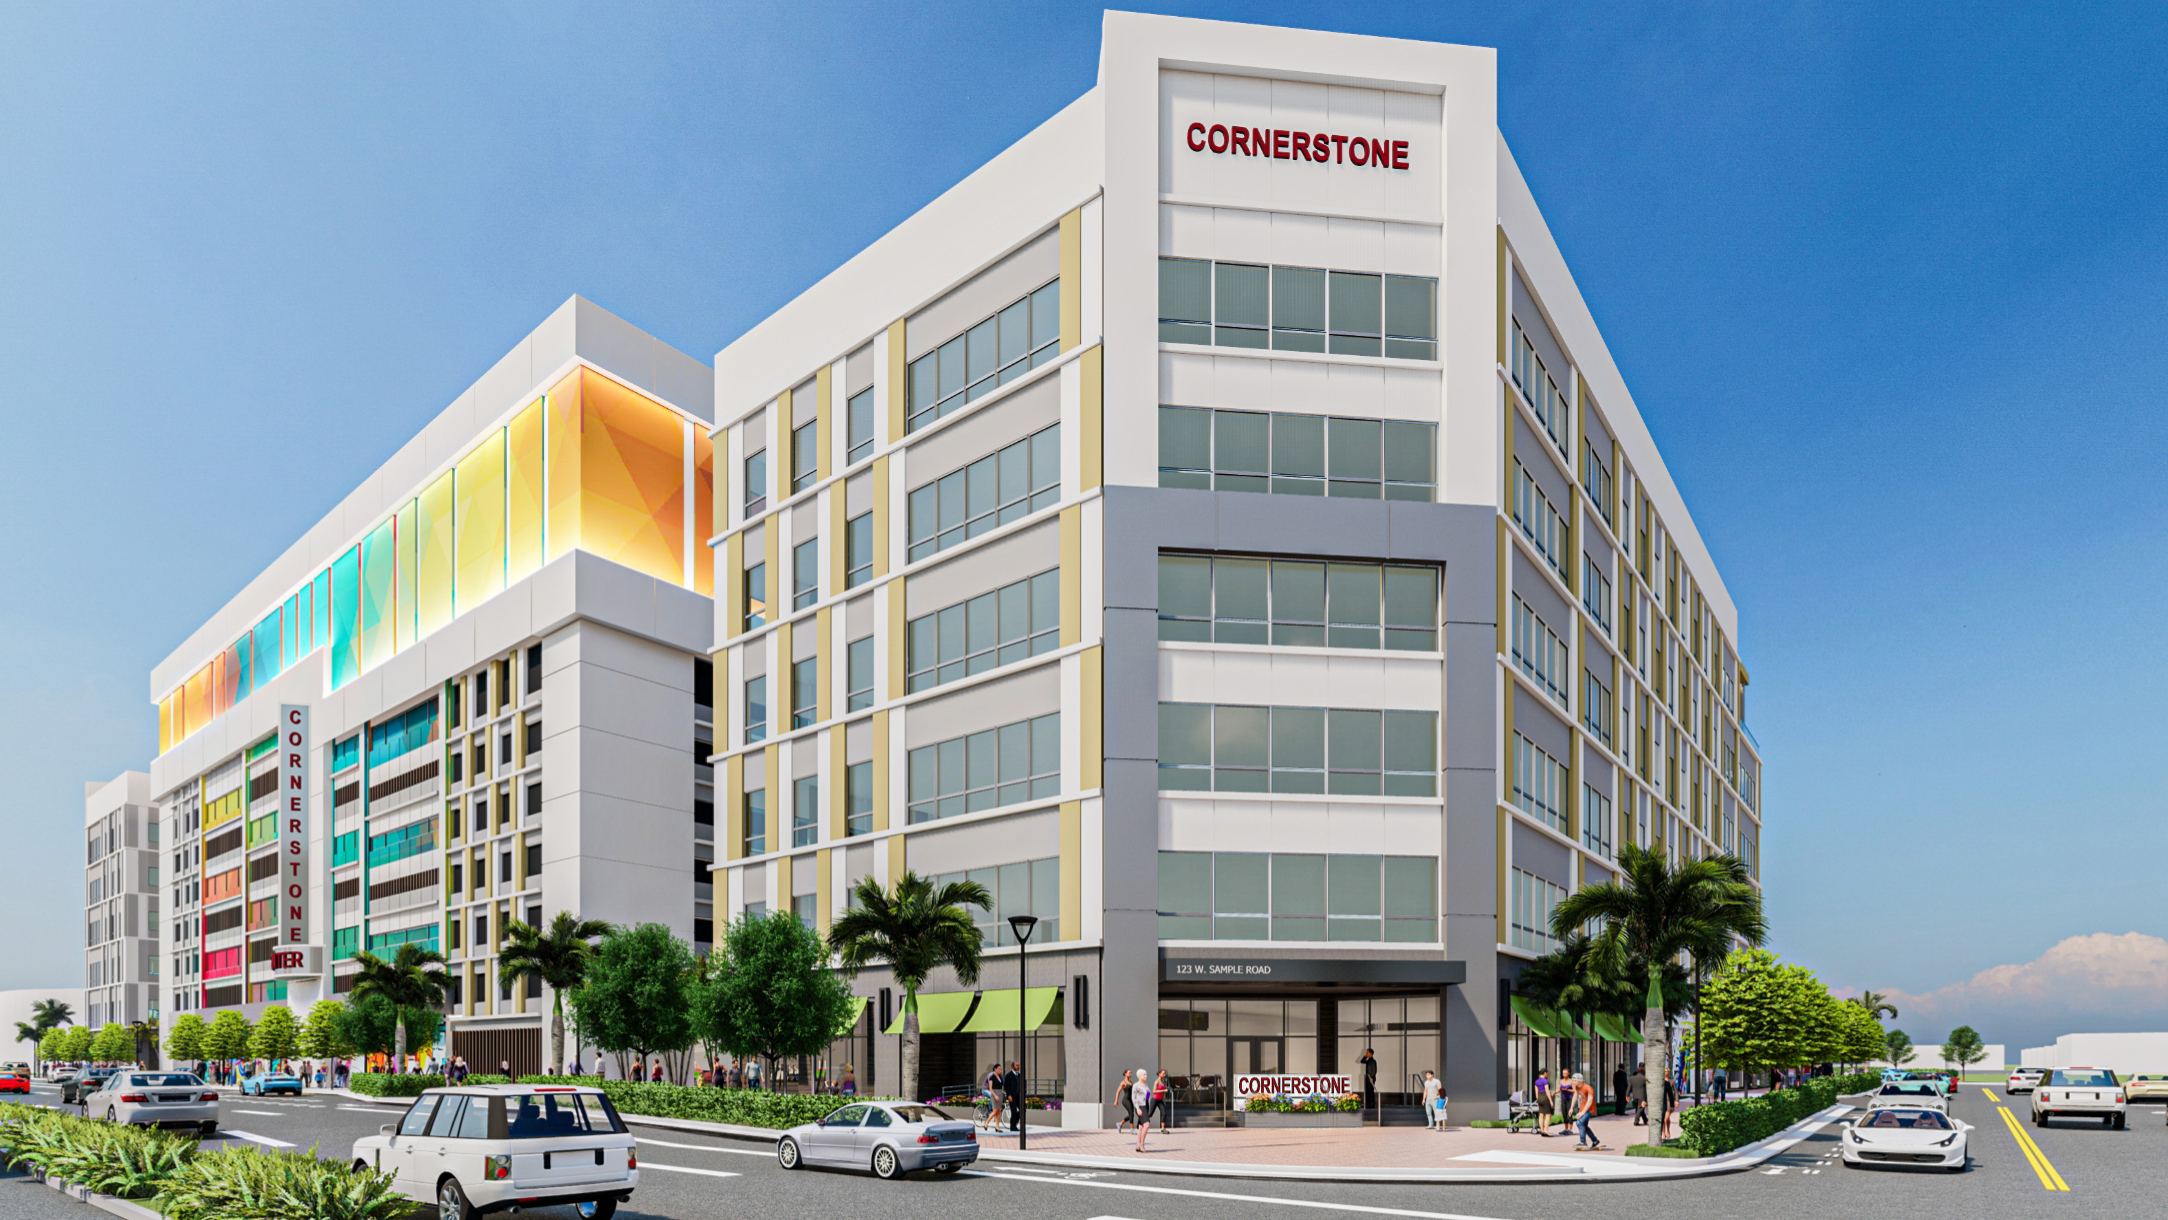 Hyatt Place Hotel Slated for Coral Springs' Cornerstone Project